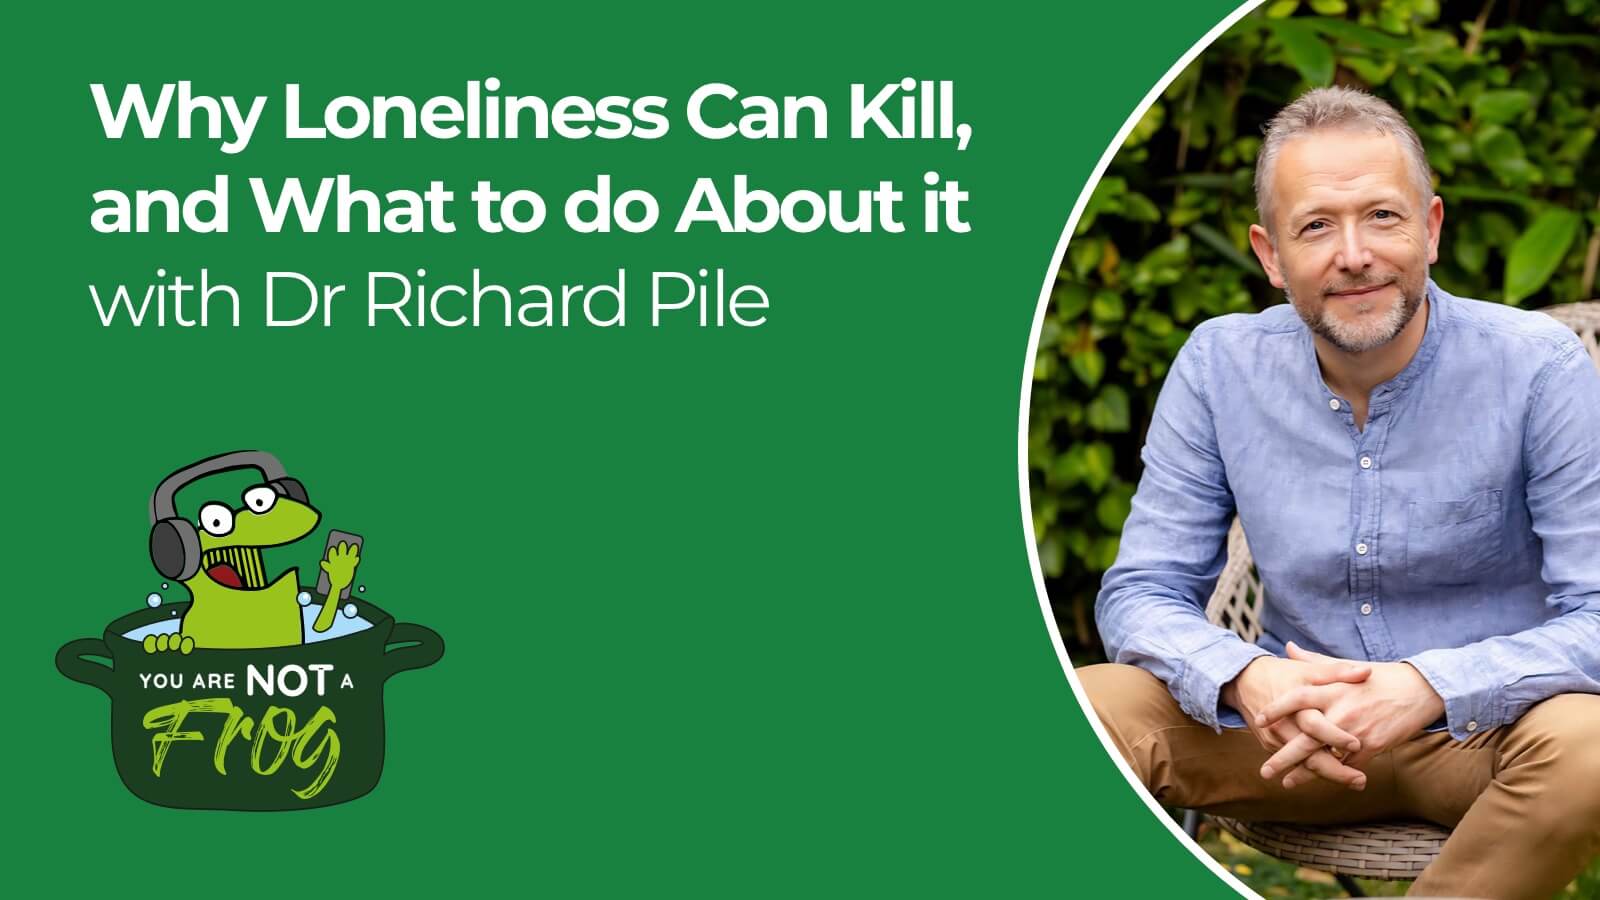 Why Loneliness Can Kill, and What to Do About it